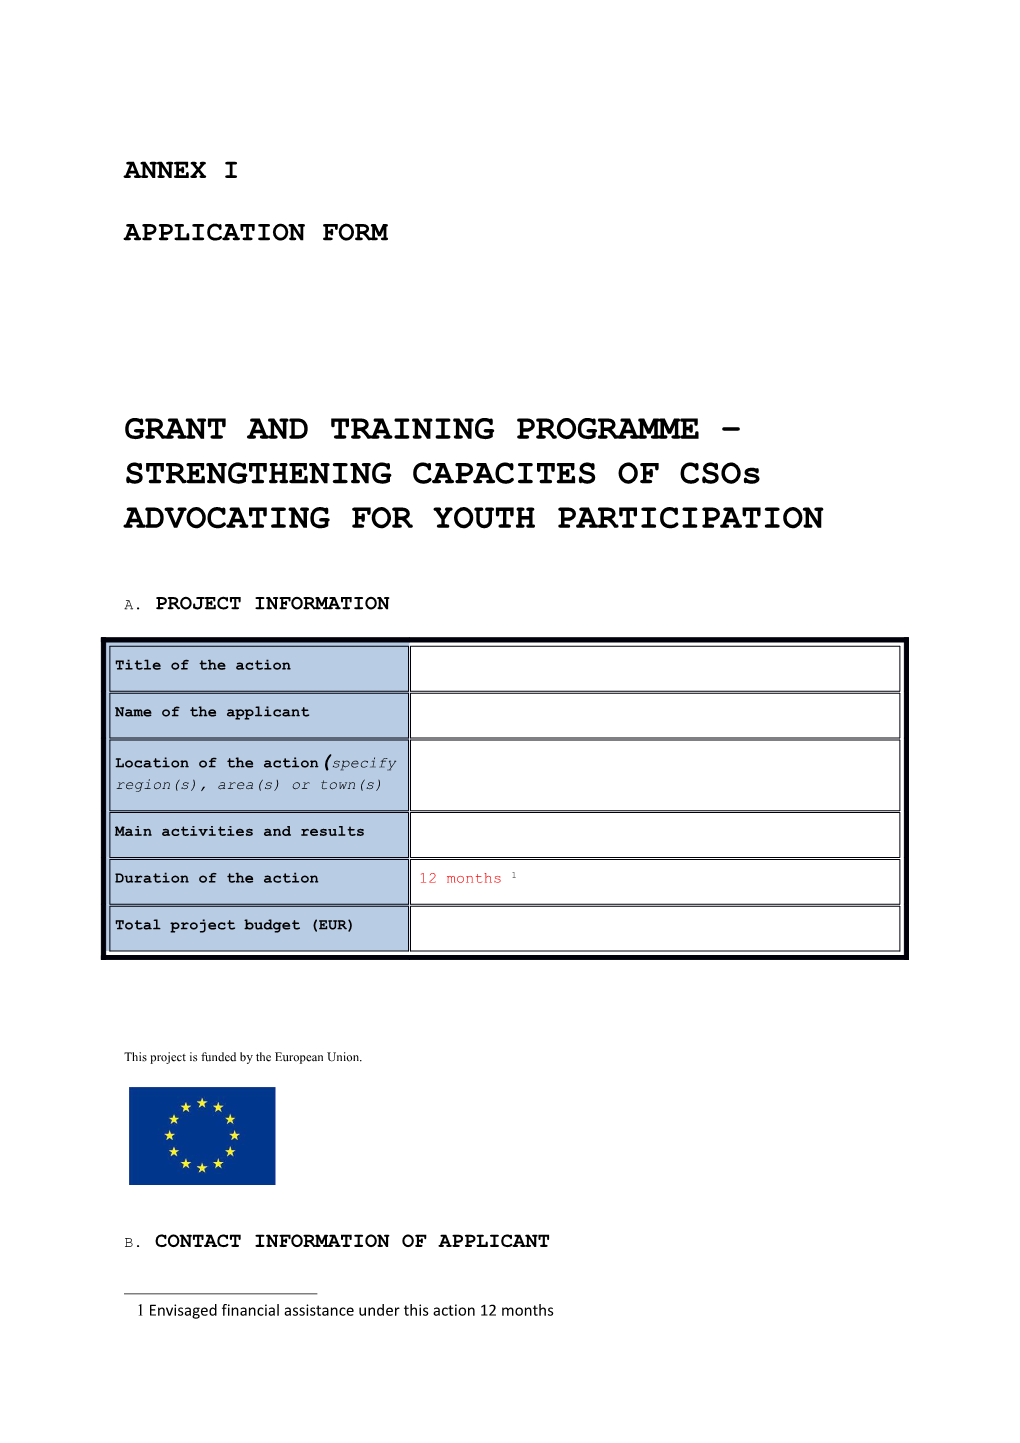 GRANT and TRAINING PROGRAMME STRENGTHENING CAPACITES of Csos ADVOCATING for YOUTH PARTICIPATION